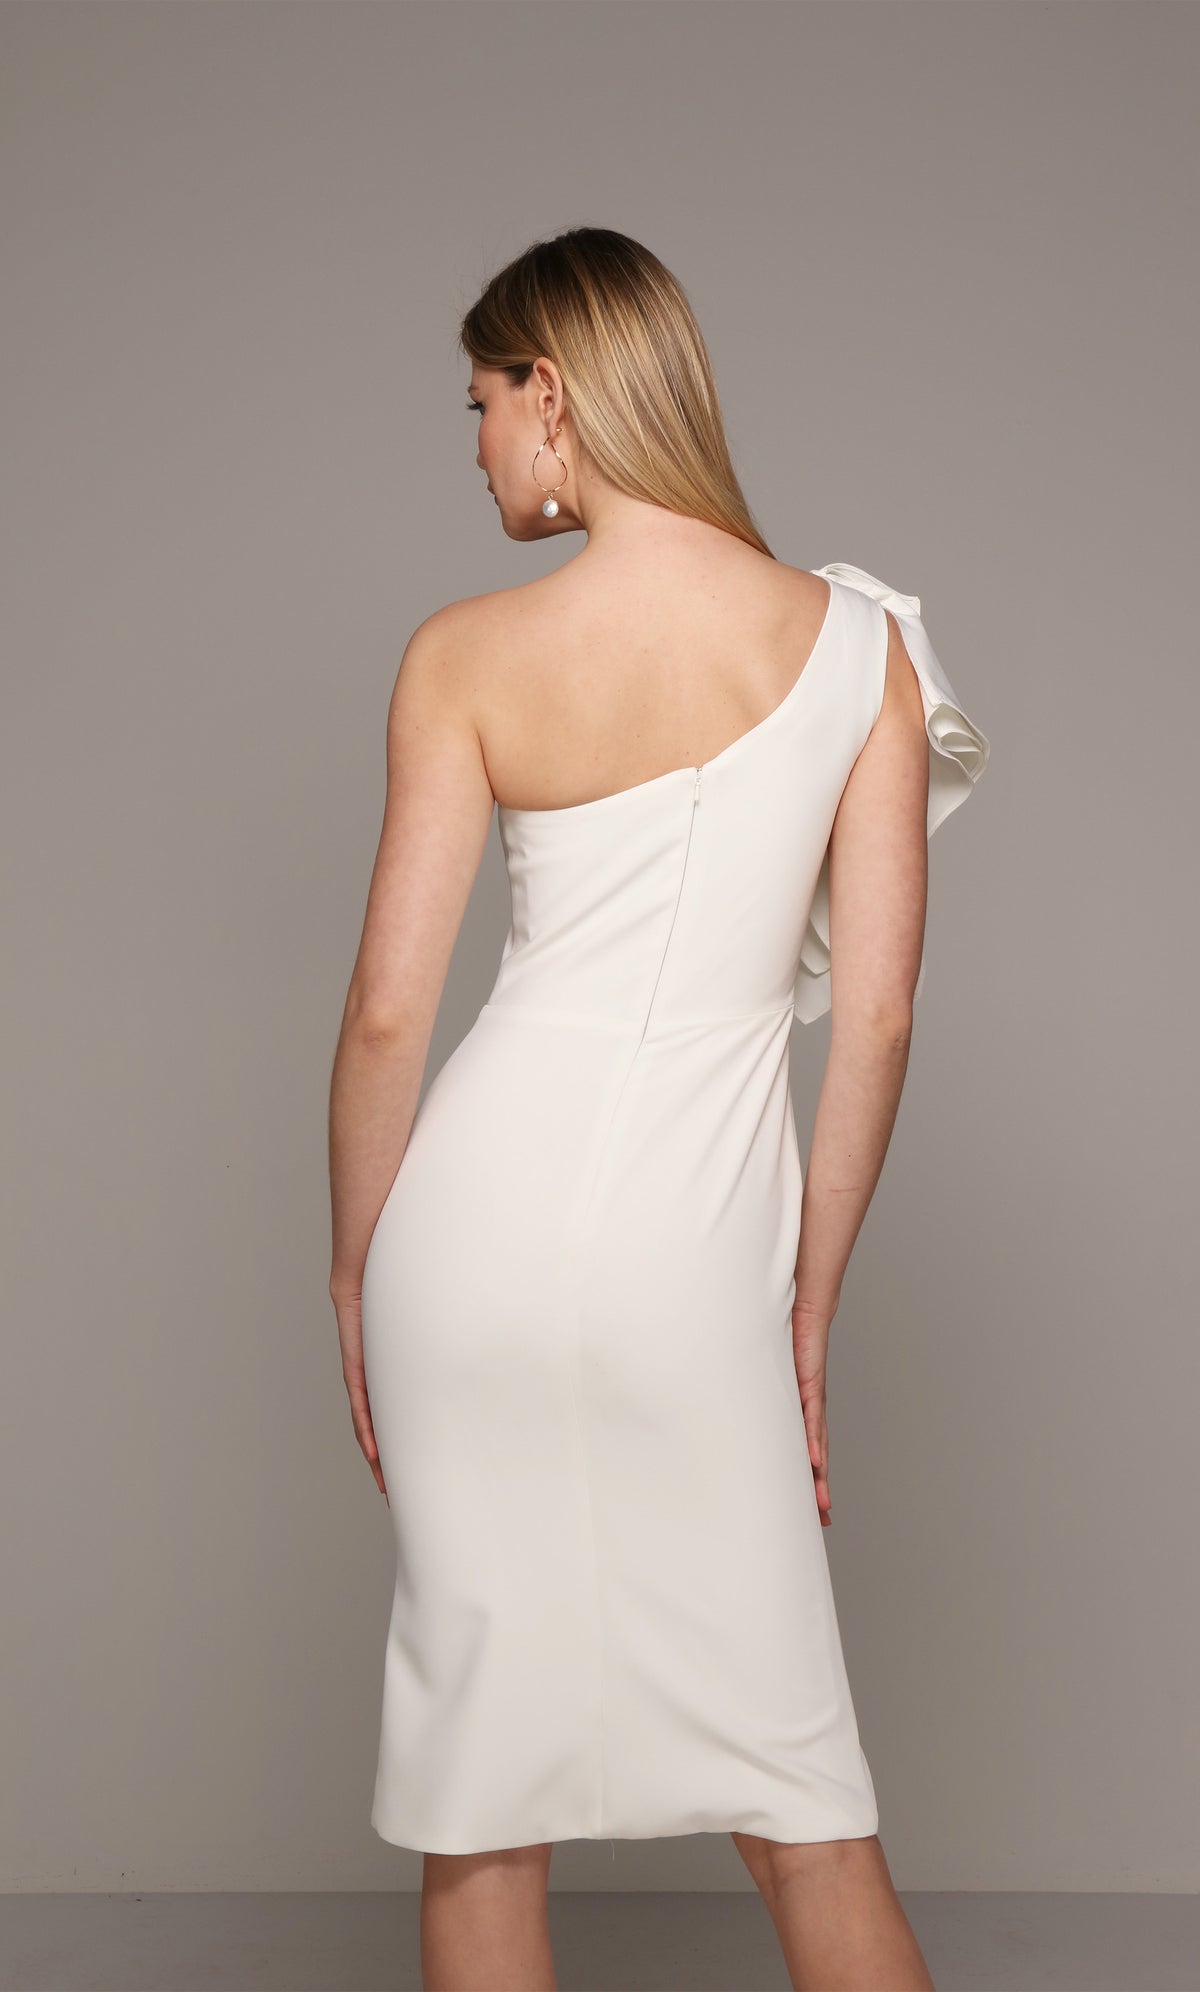 Chic one shoulder ruffle engagement dress with a zip up back in ivory.